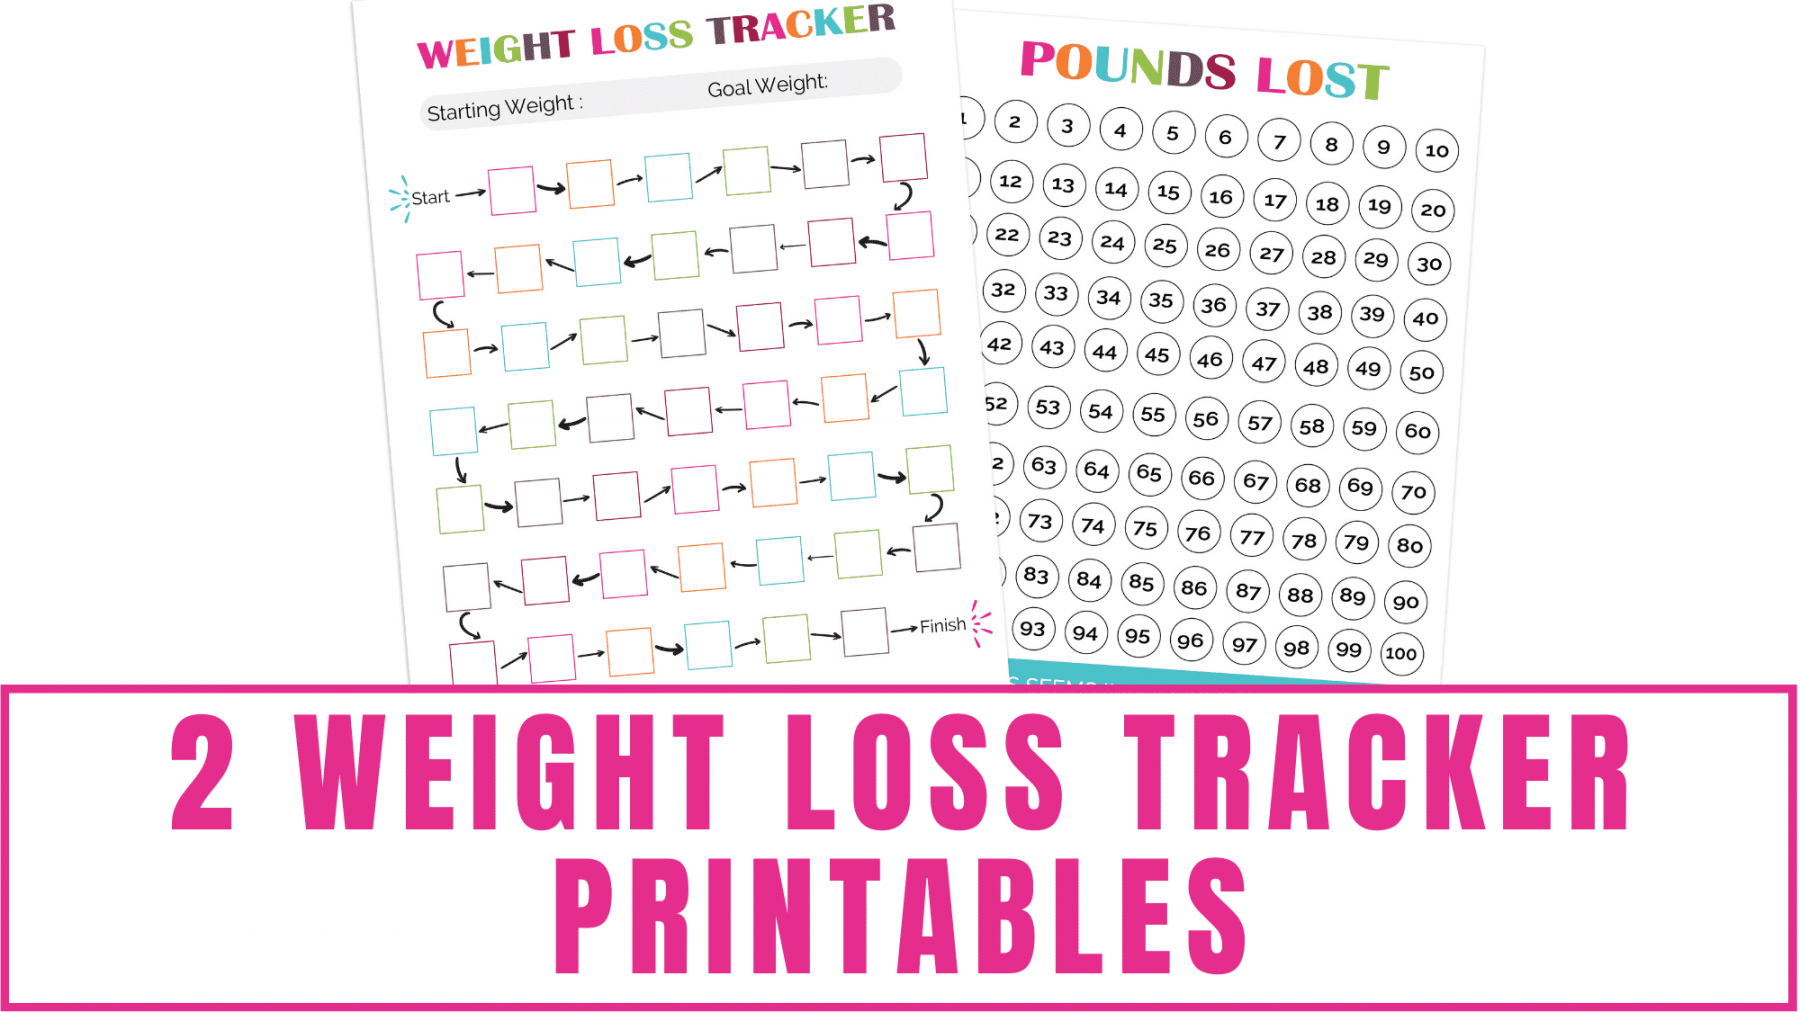 Weight Loss Tracker Printables - Freebie Finding Mom - FREE Printables - Free Weight Loss Tracker Printable